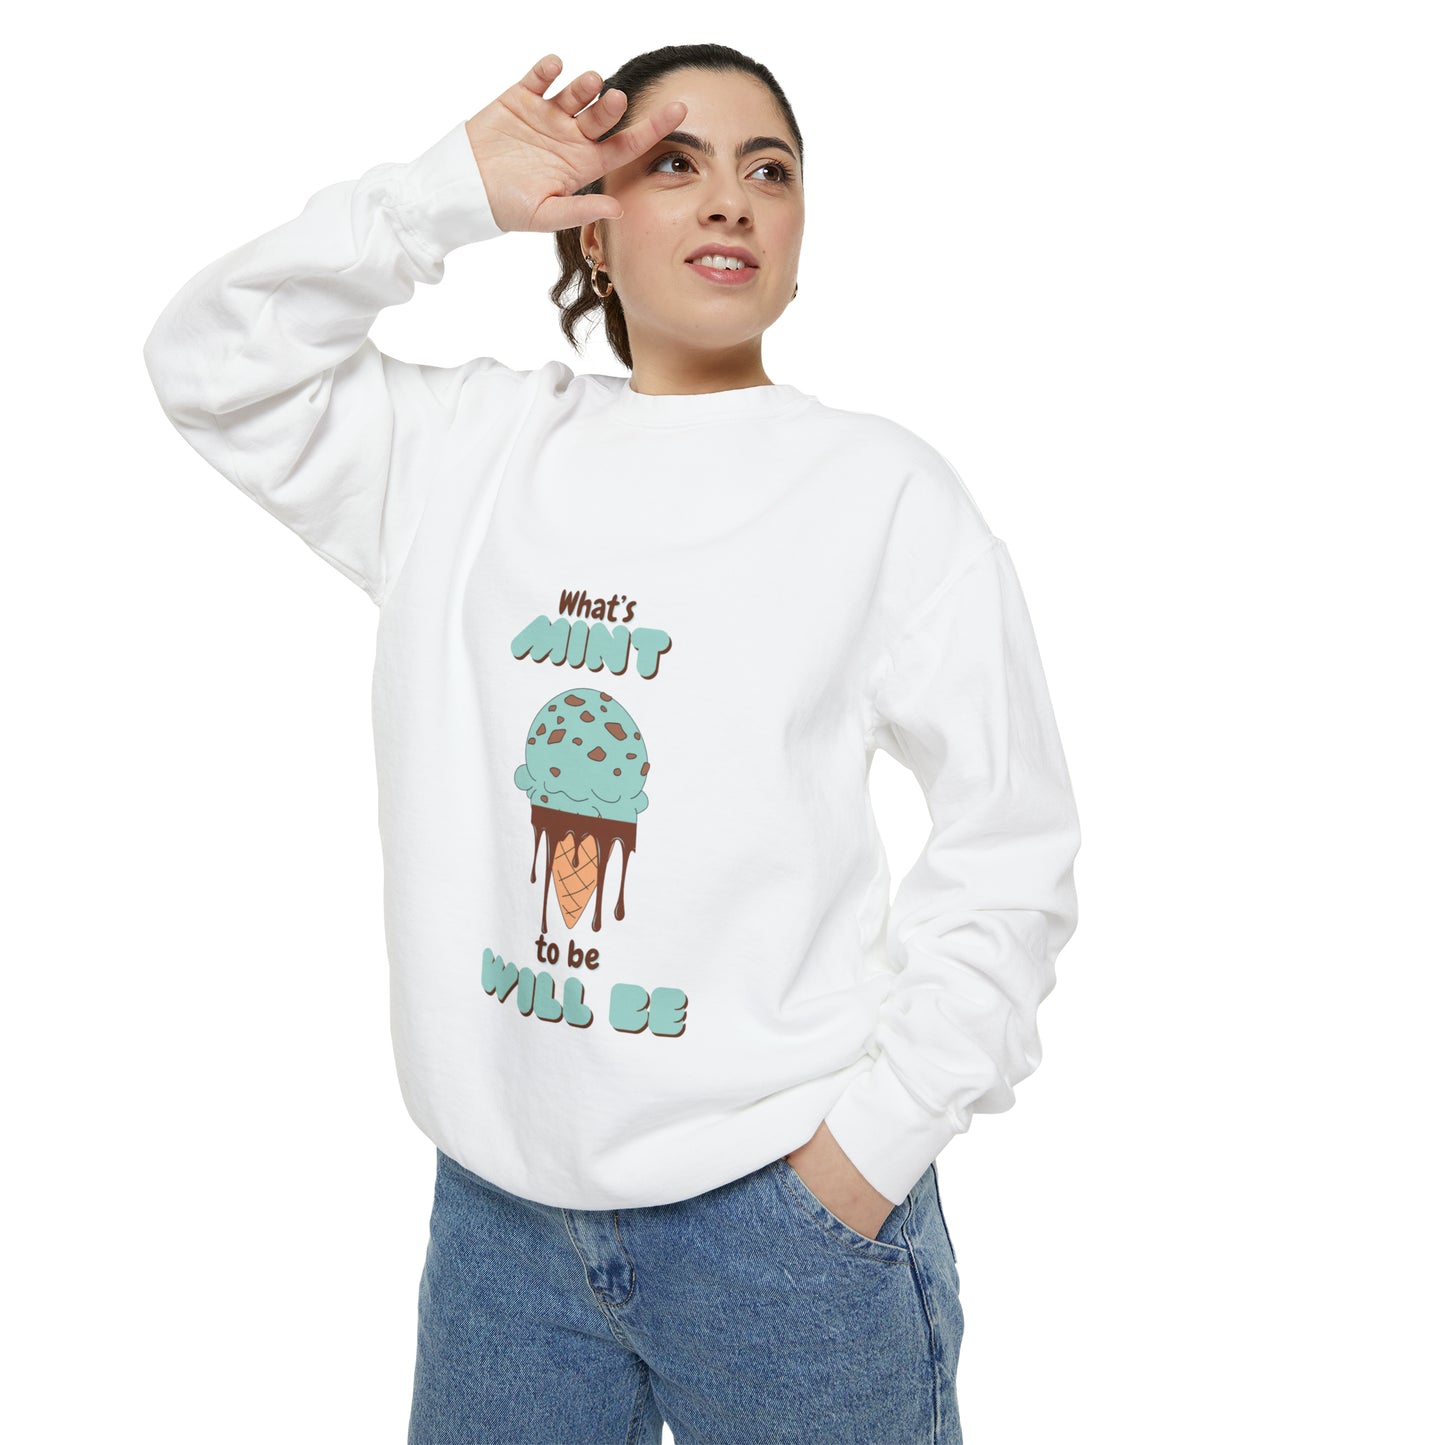 Unisex Garment-Dyed "What's Mint to be Will be" Sweatshirt